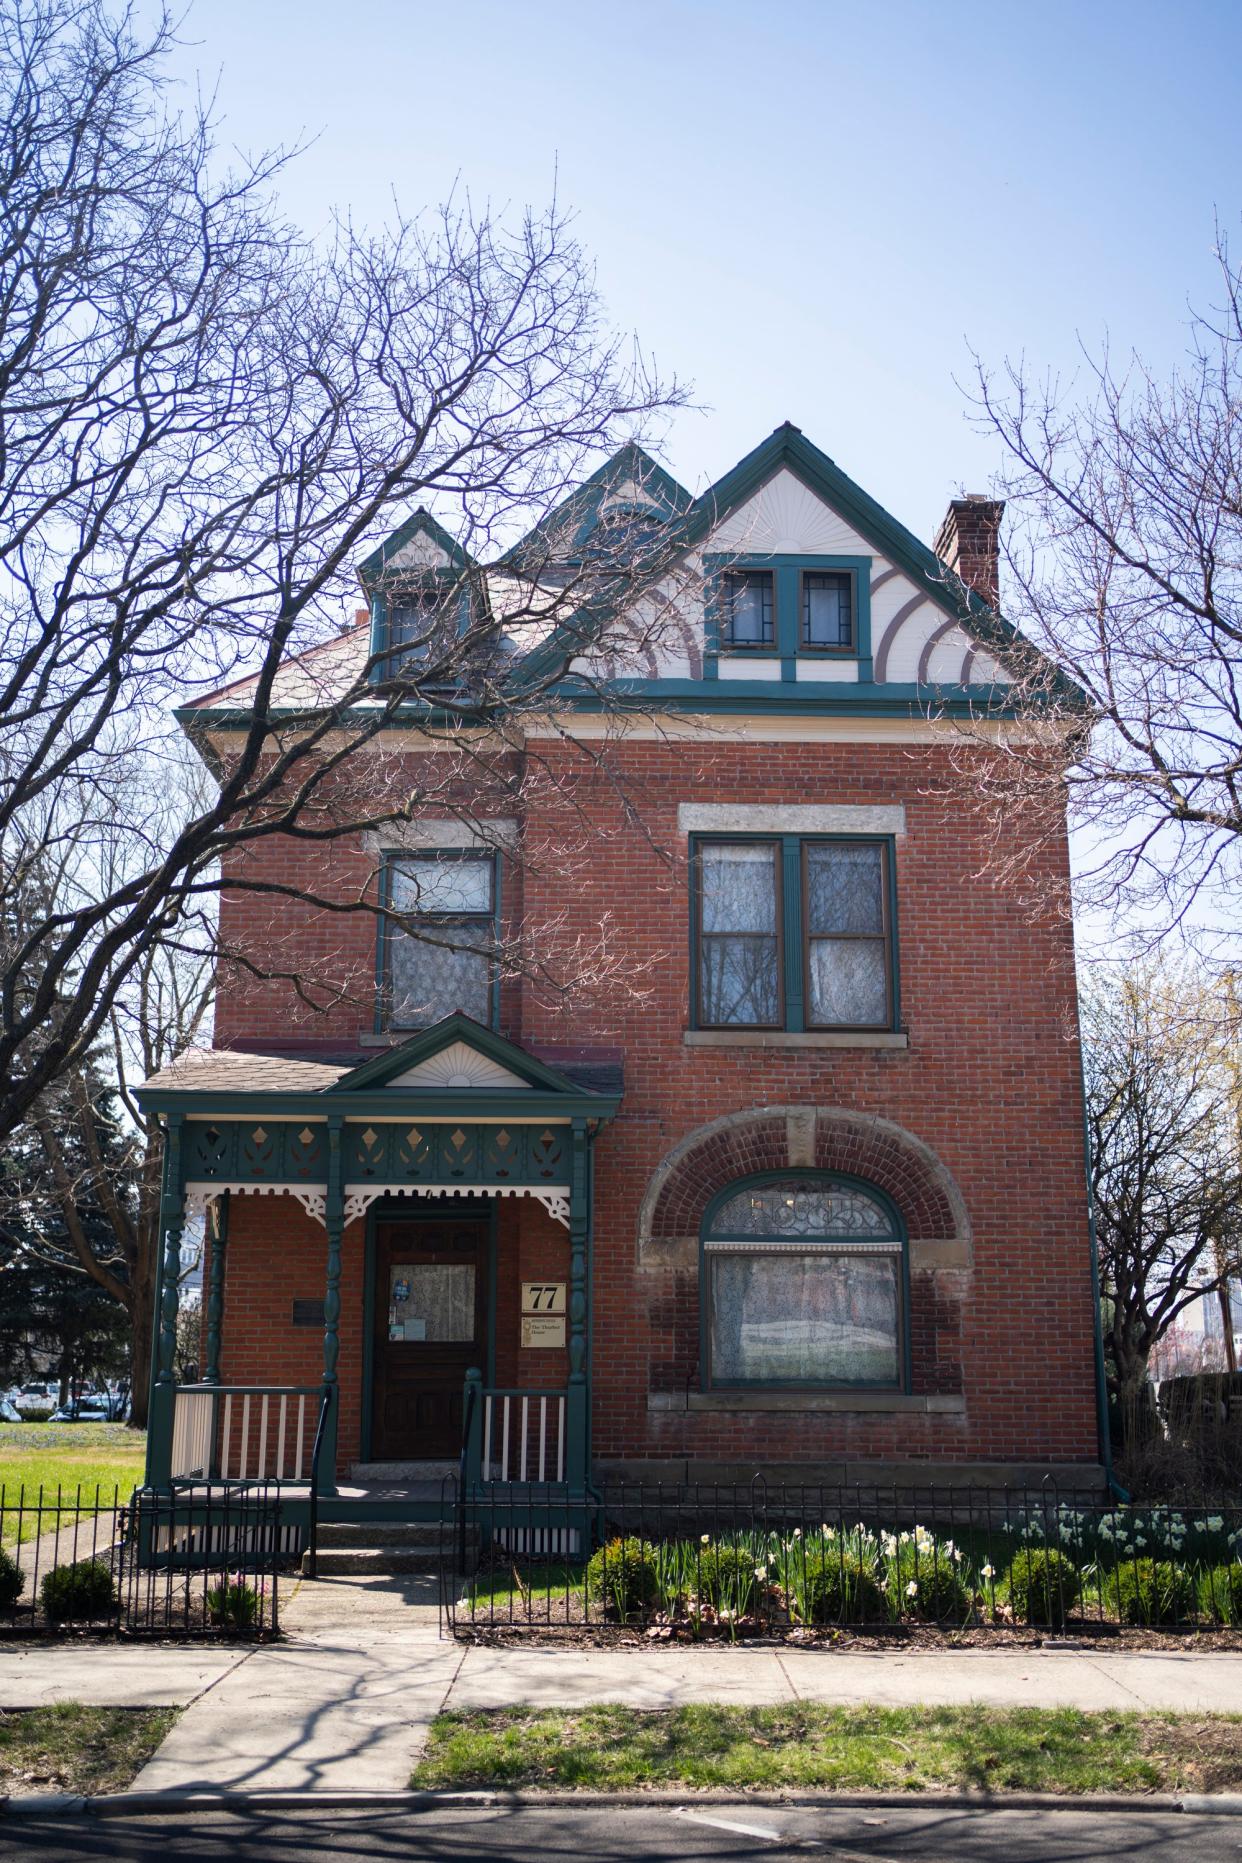 This year is the 40th anniversary of Thurber House being a literary center for readers and writers.